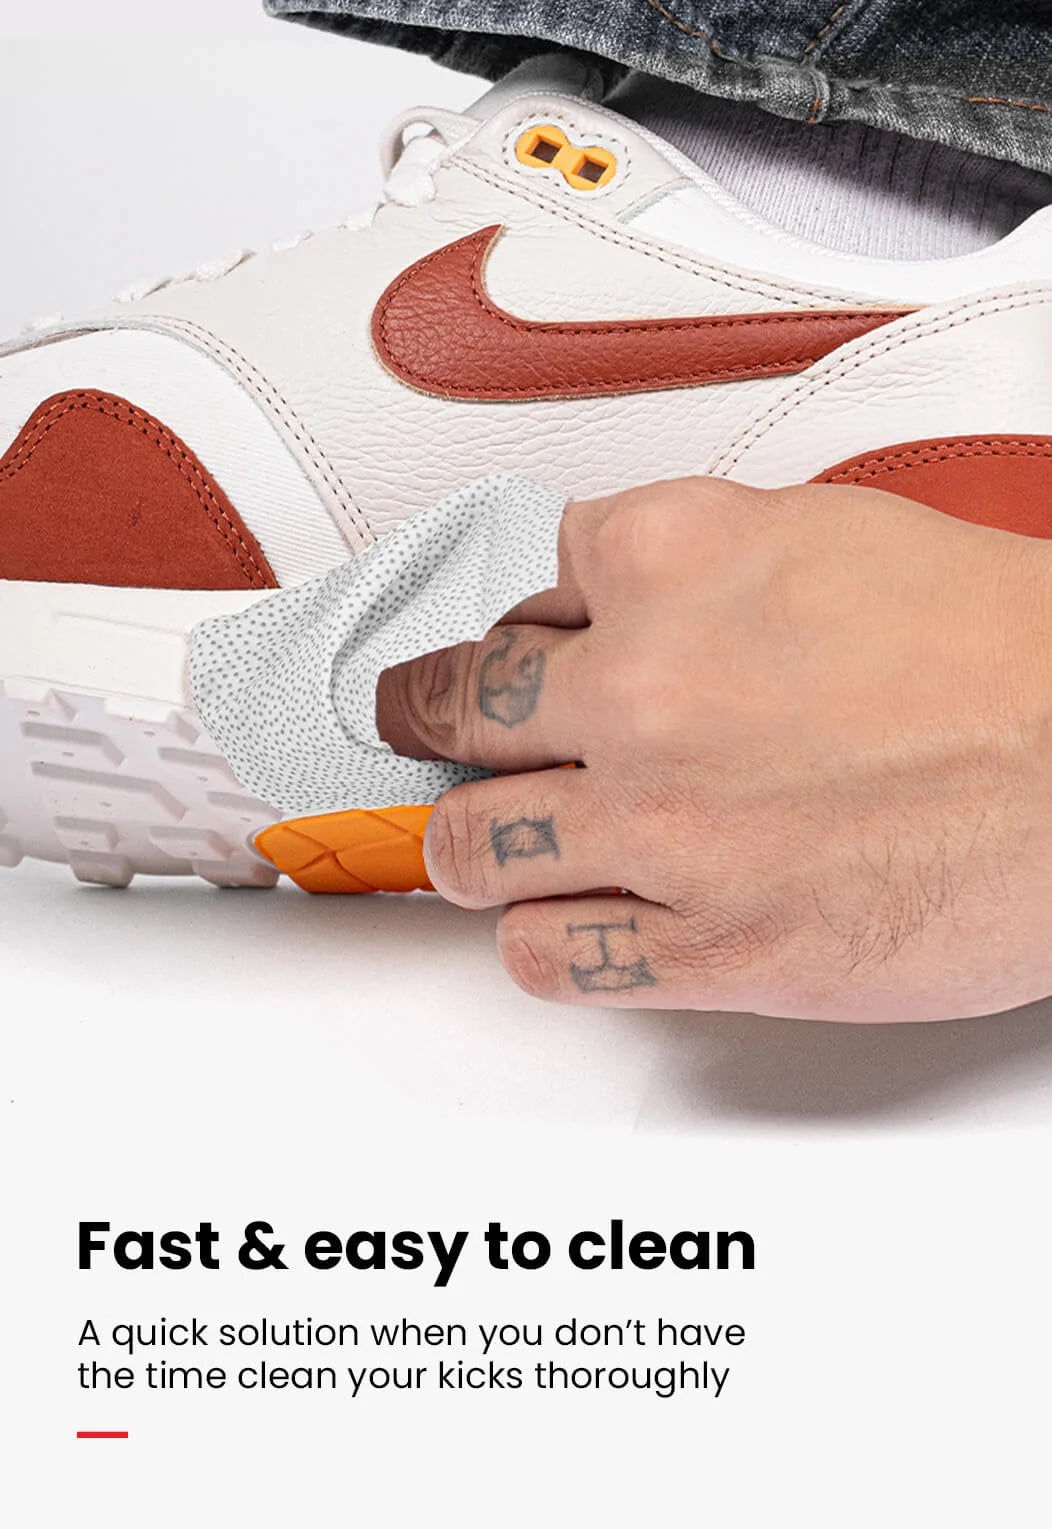 shoe cleaning wipes for sneakers shoegr best india fast easy cleaning quick cleaning 